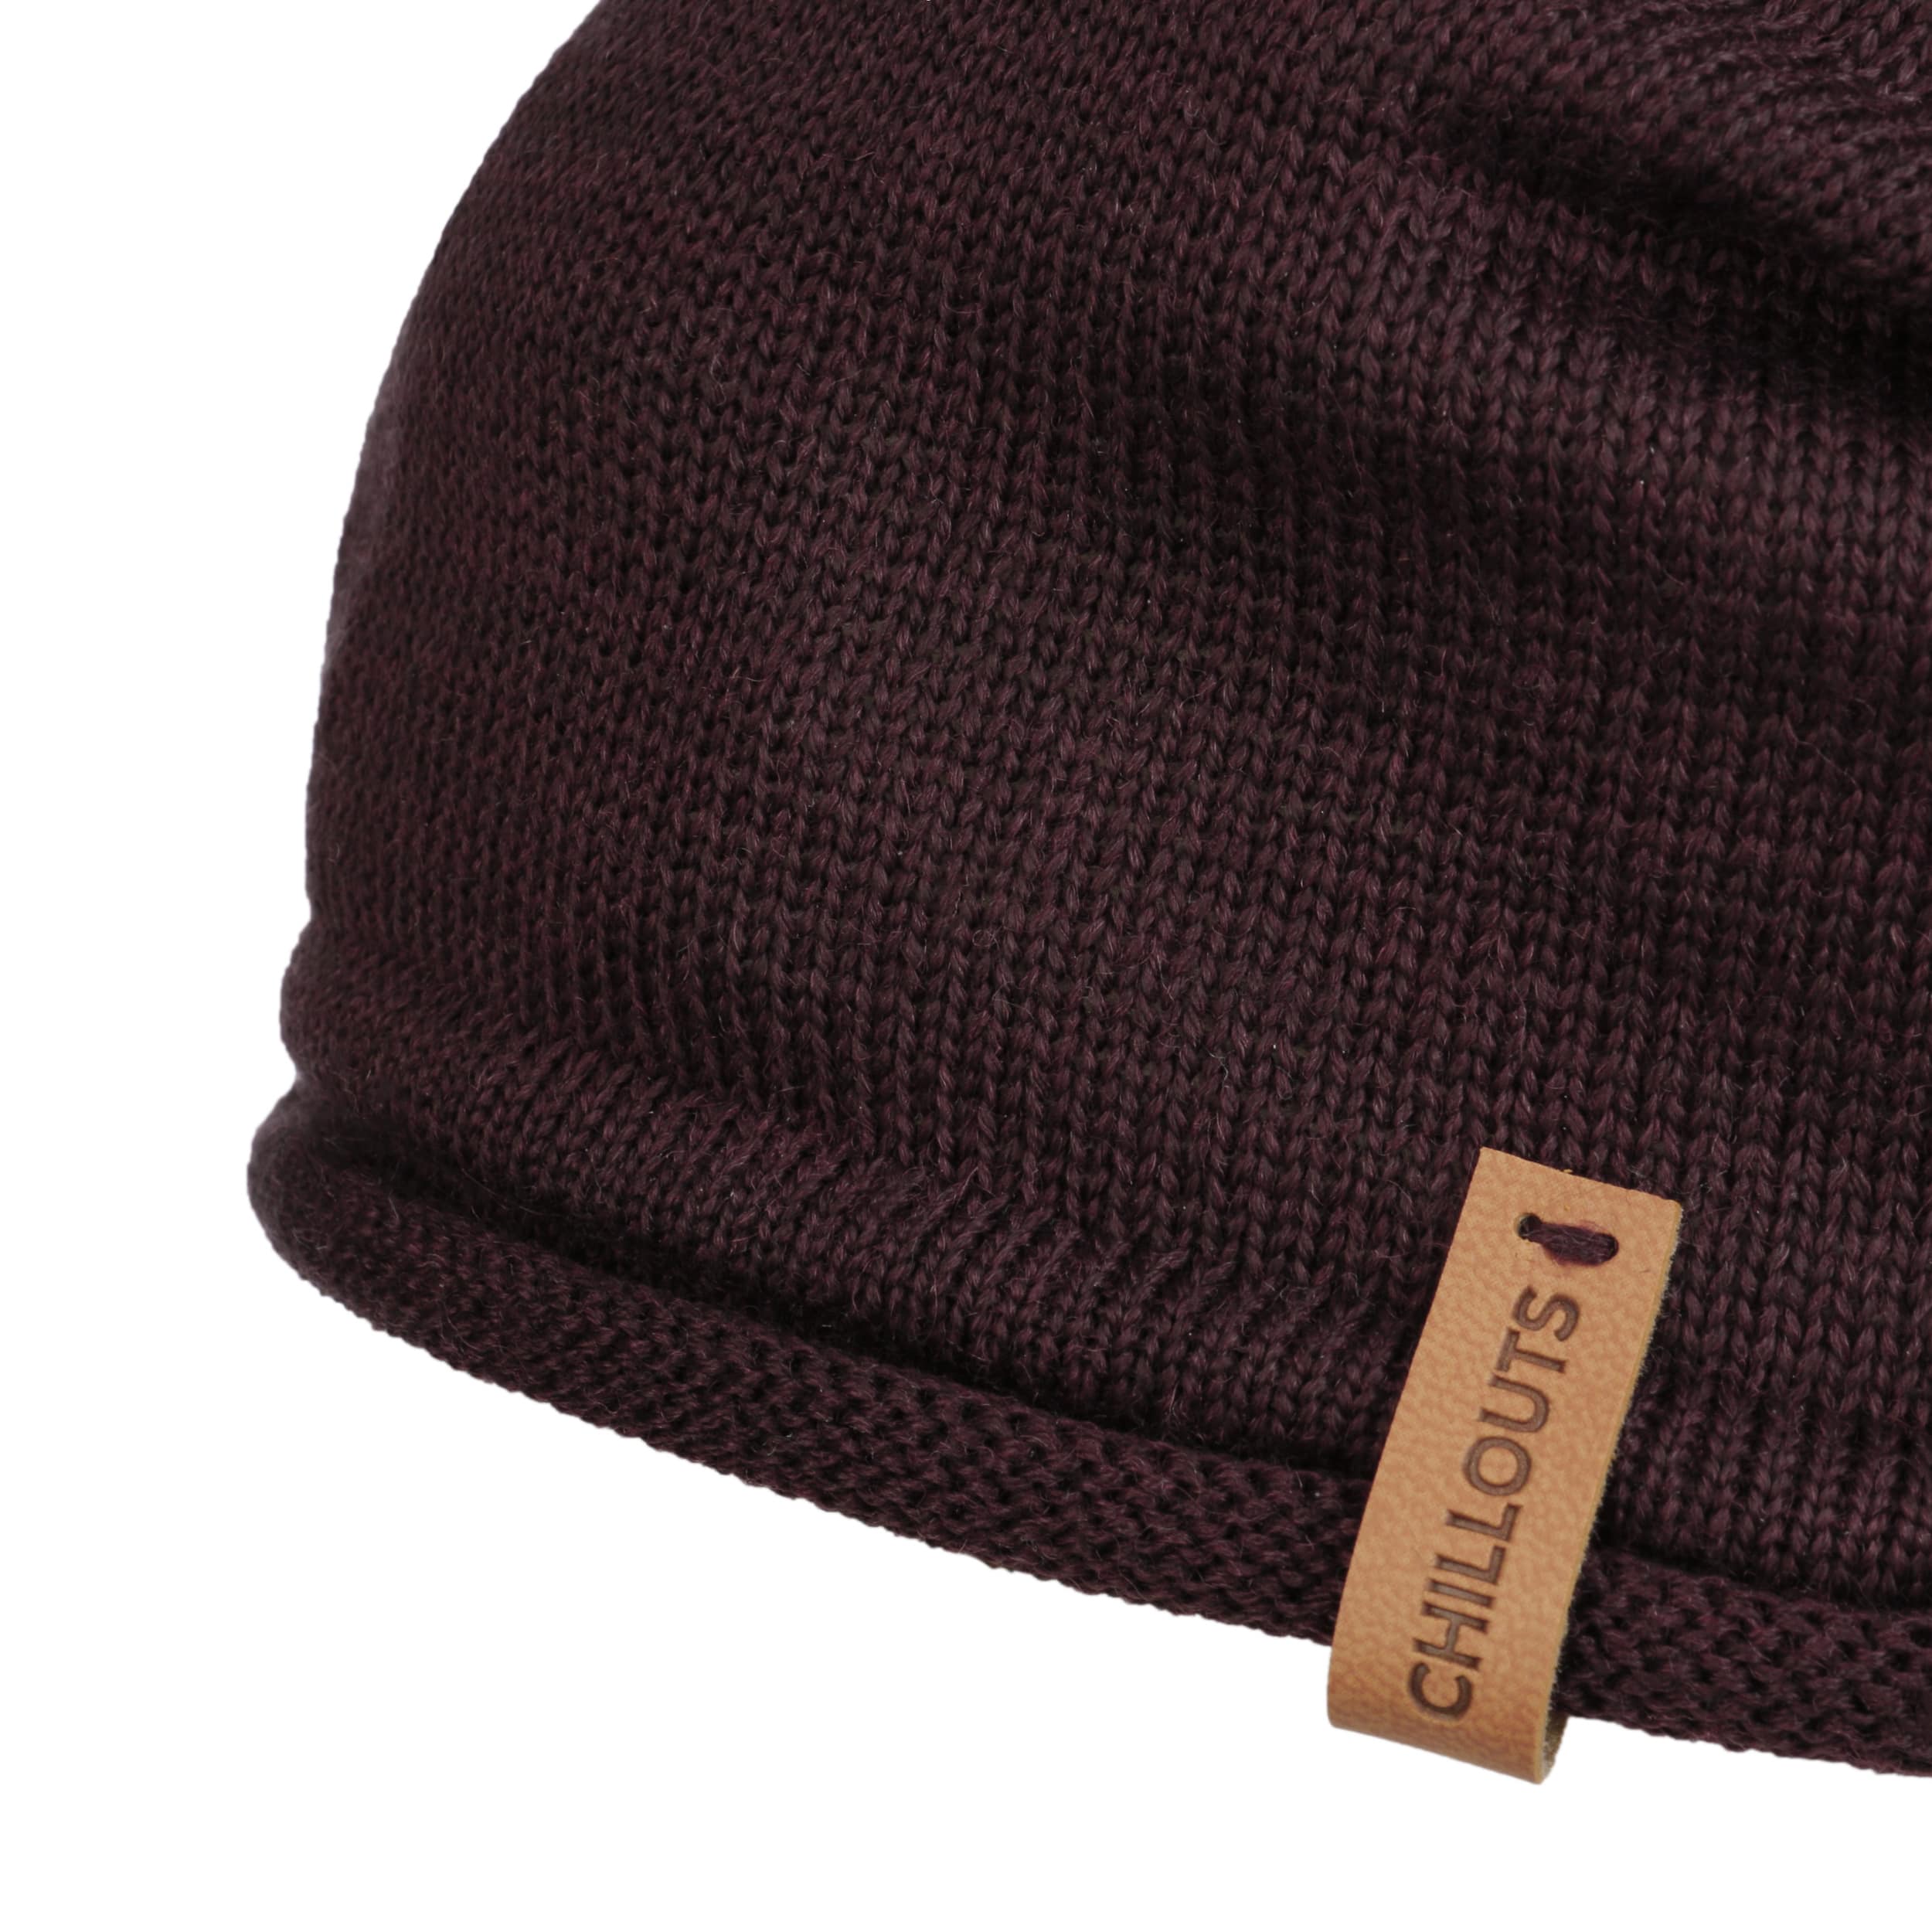 Leicester Oversize Beanie - € 29,95 by Chillouts